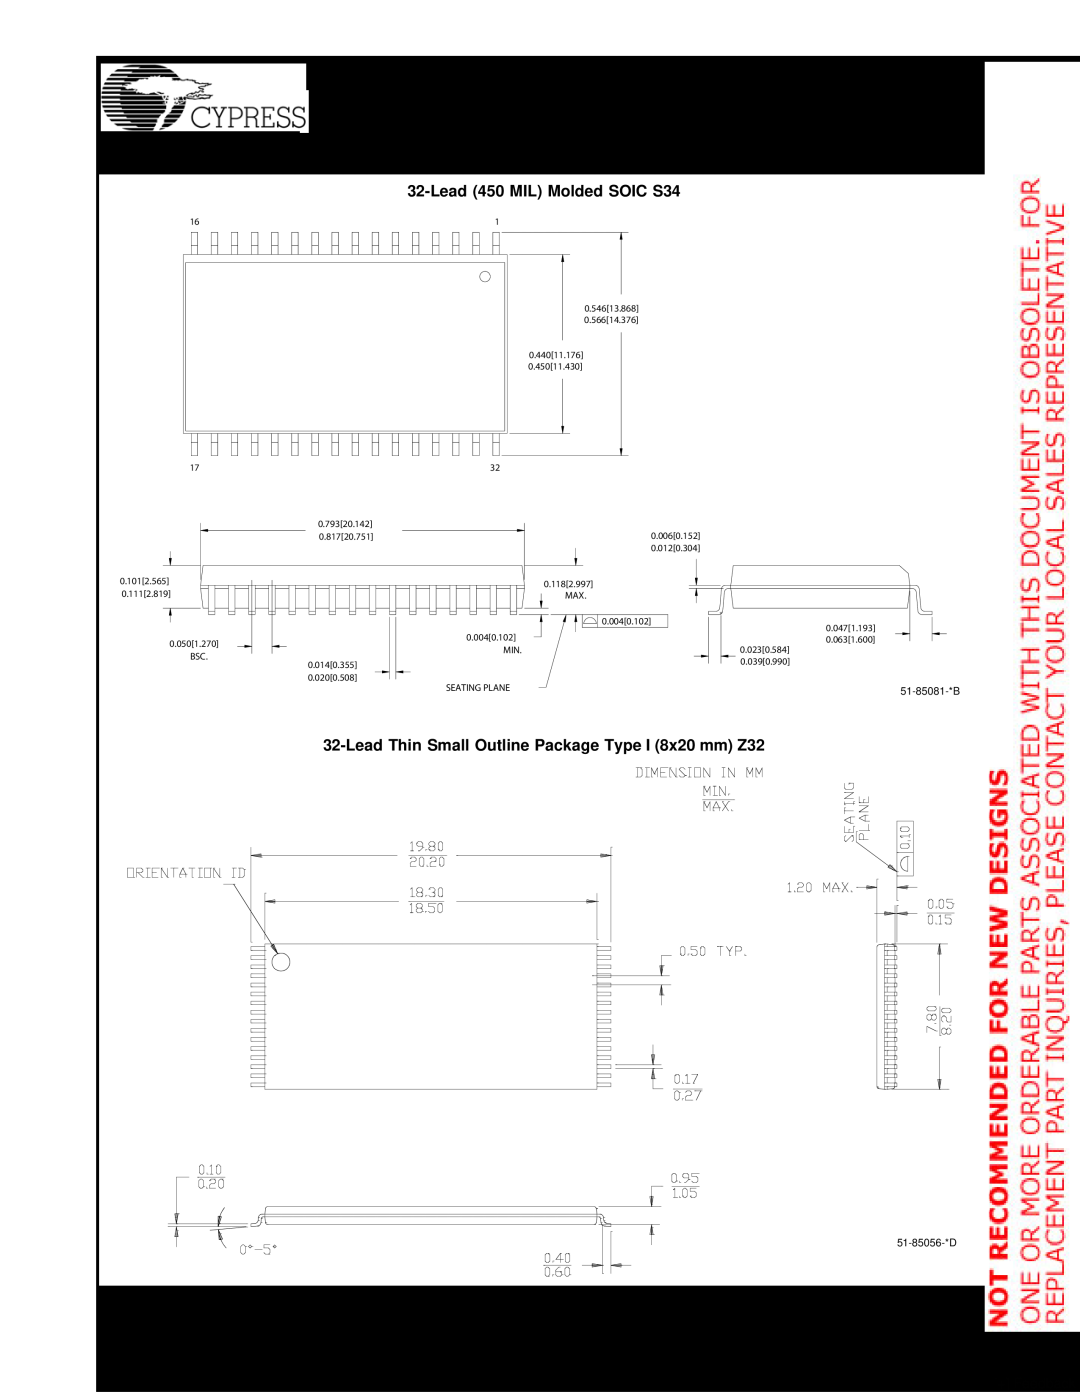 Cypress CY62128B manual Package Diagrams, Lead 450 MIL Molded SOIC S34, Lead Thin Small Outline Package Type I 8x20 mm Z32 